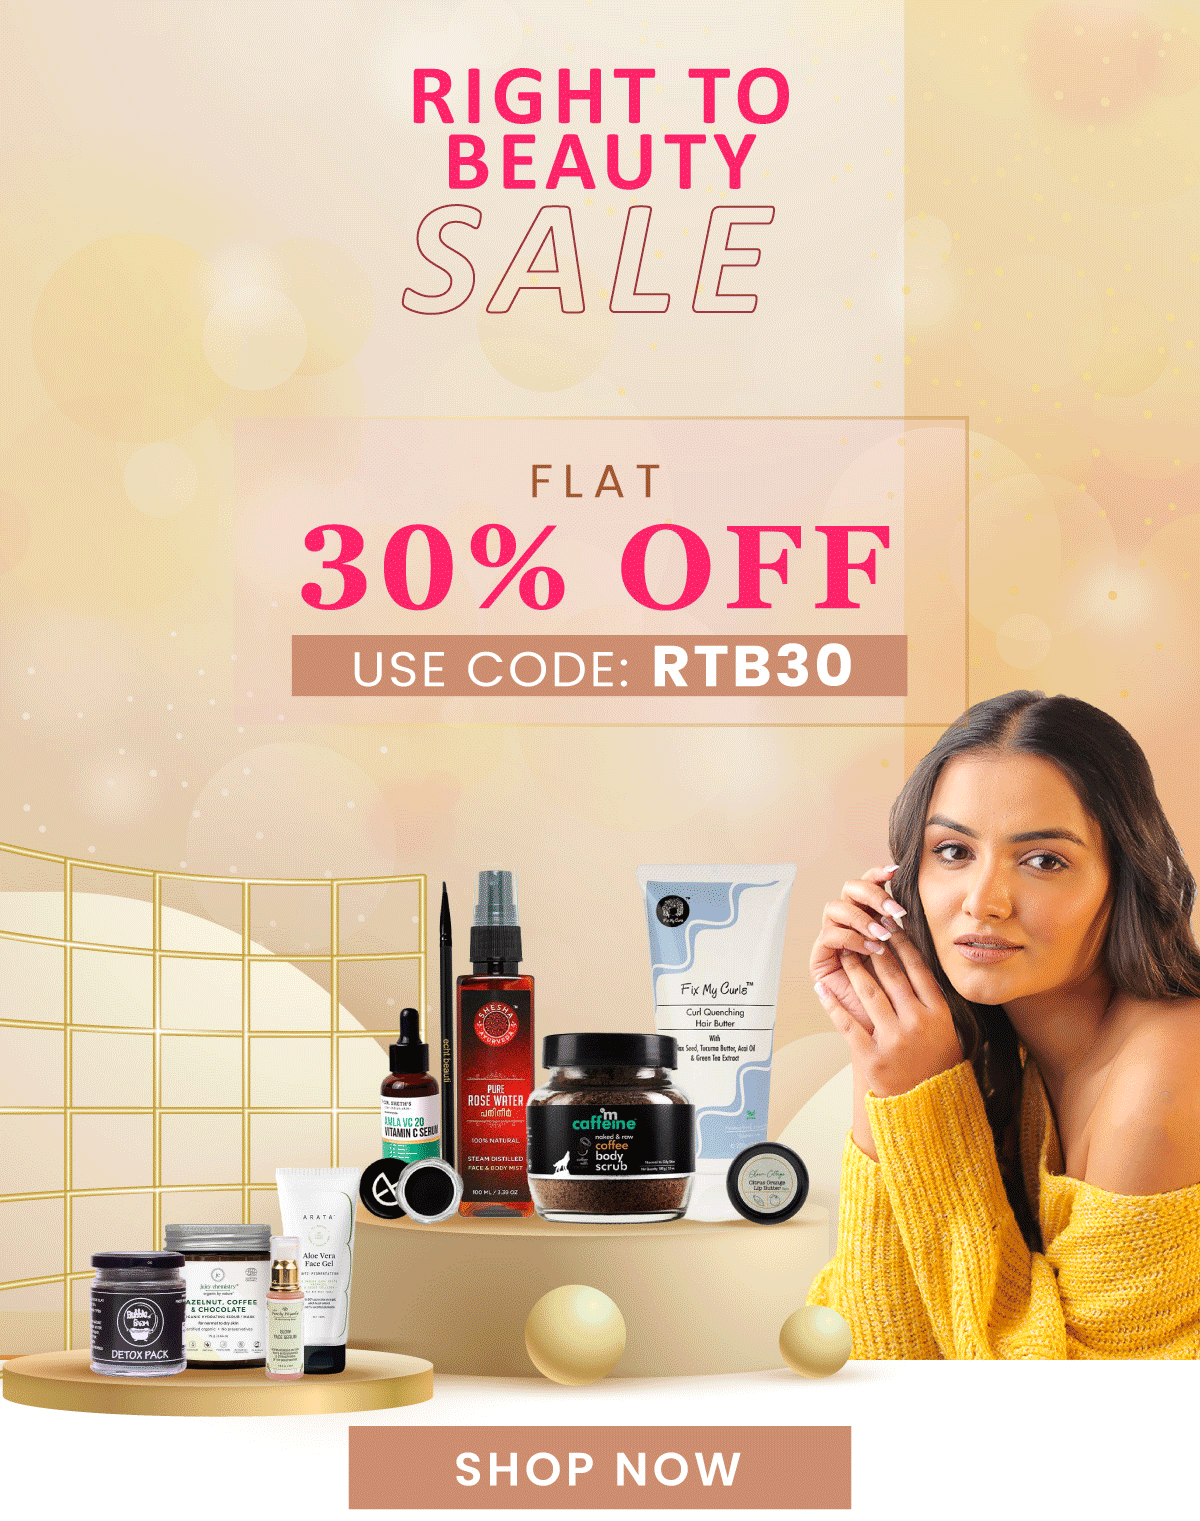 RIGHT TO BEAUTY SALE FLAT 30% OFF : 